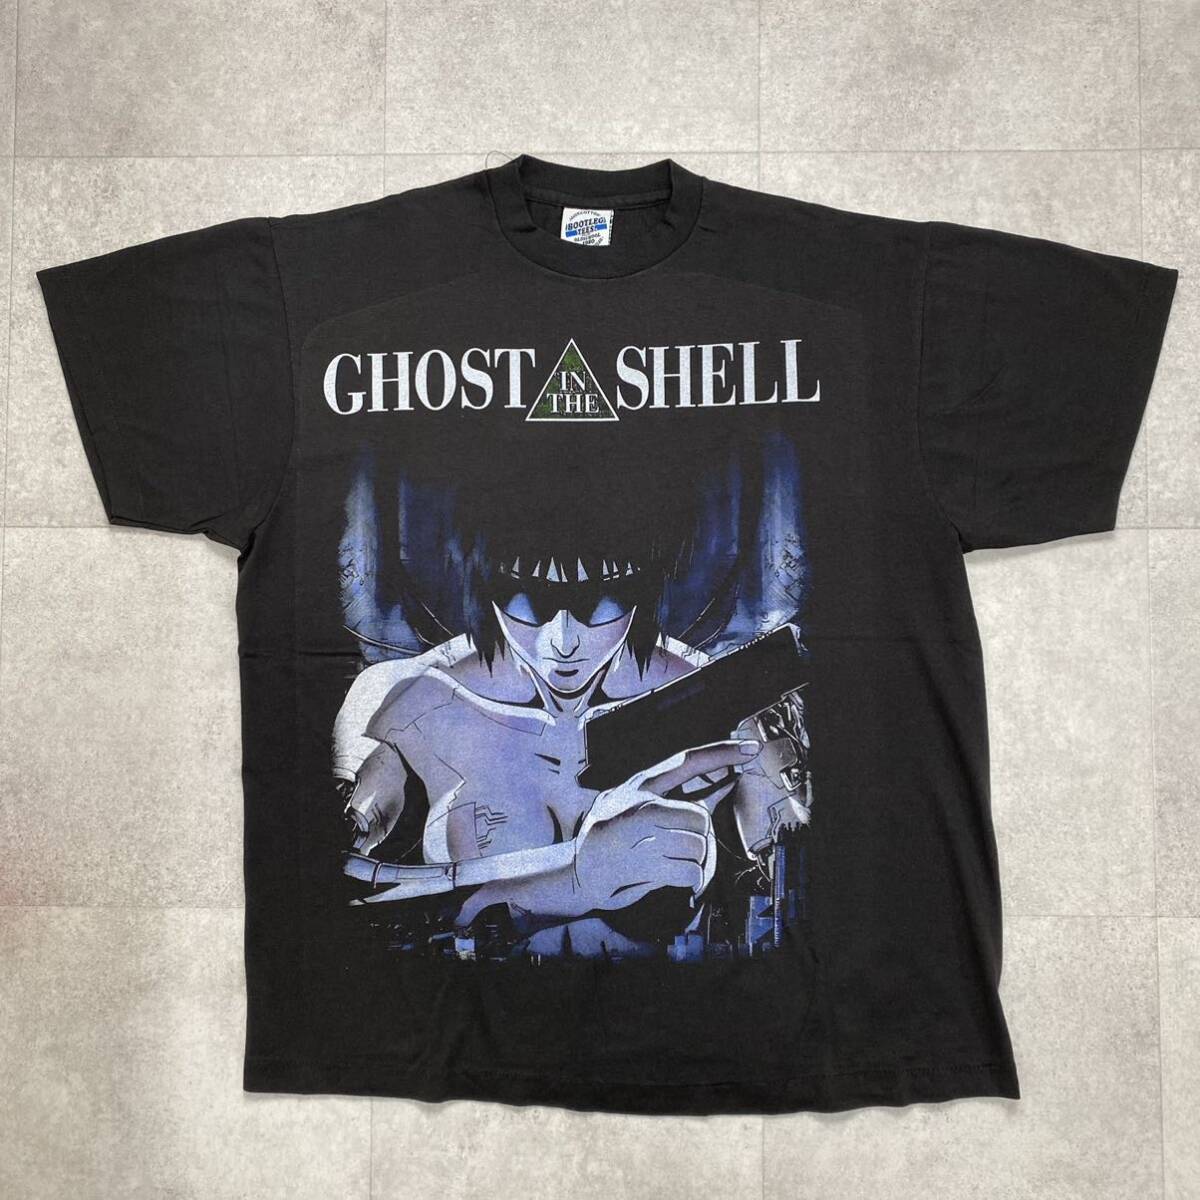 GHOST IN THE SHELL 攻殻機動隊 Tシャツ tee_画像1